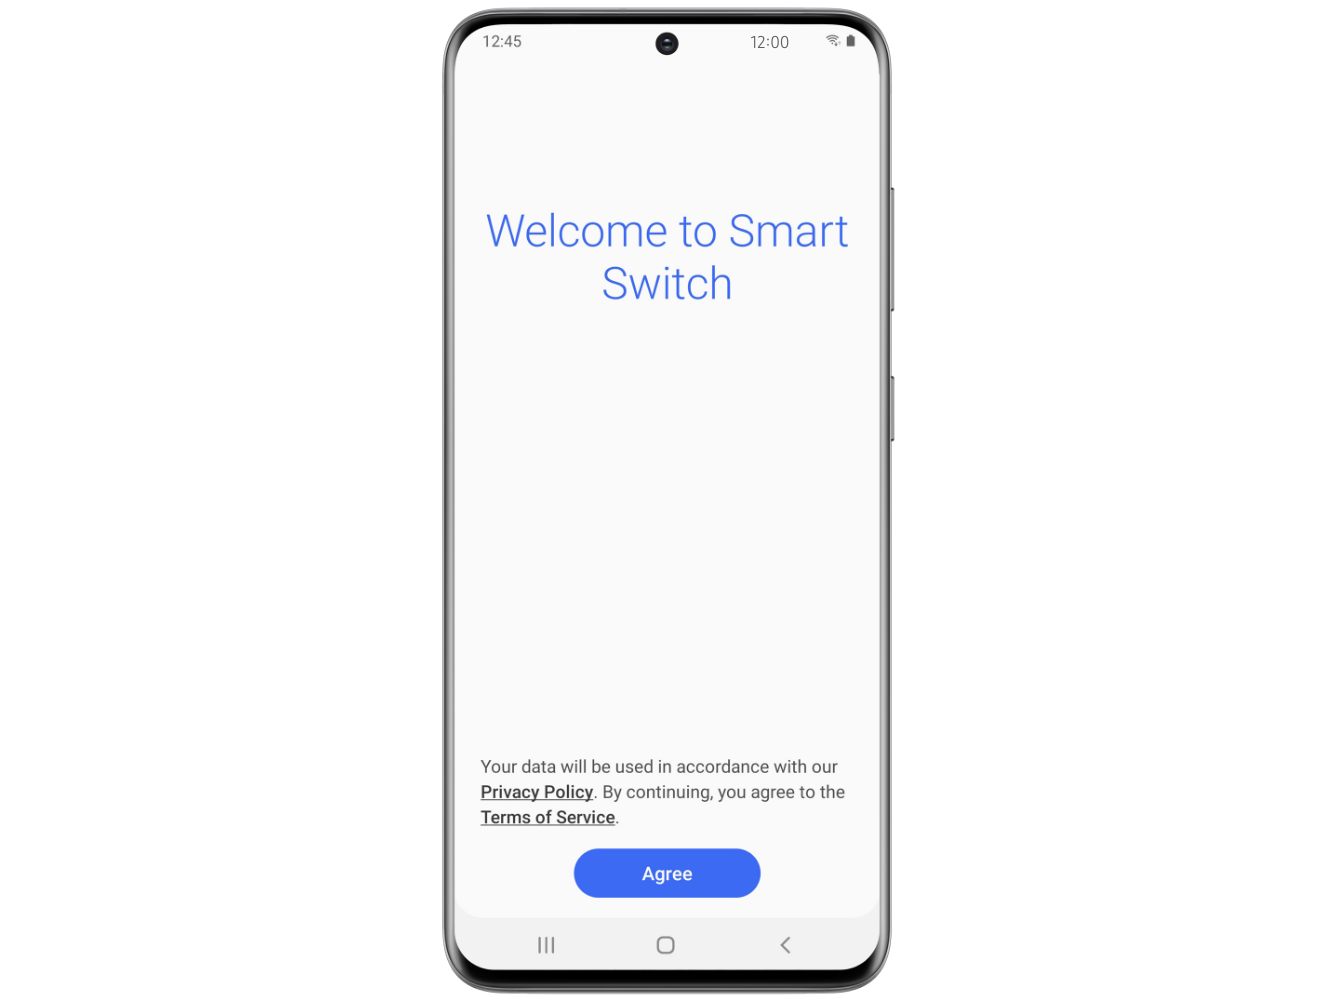 samsung smart switch application for windows